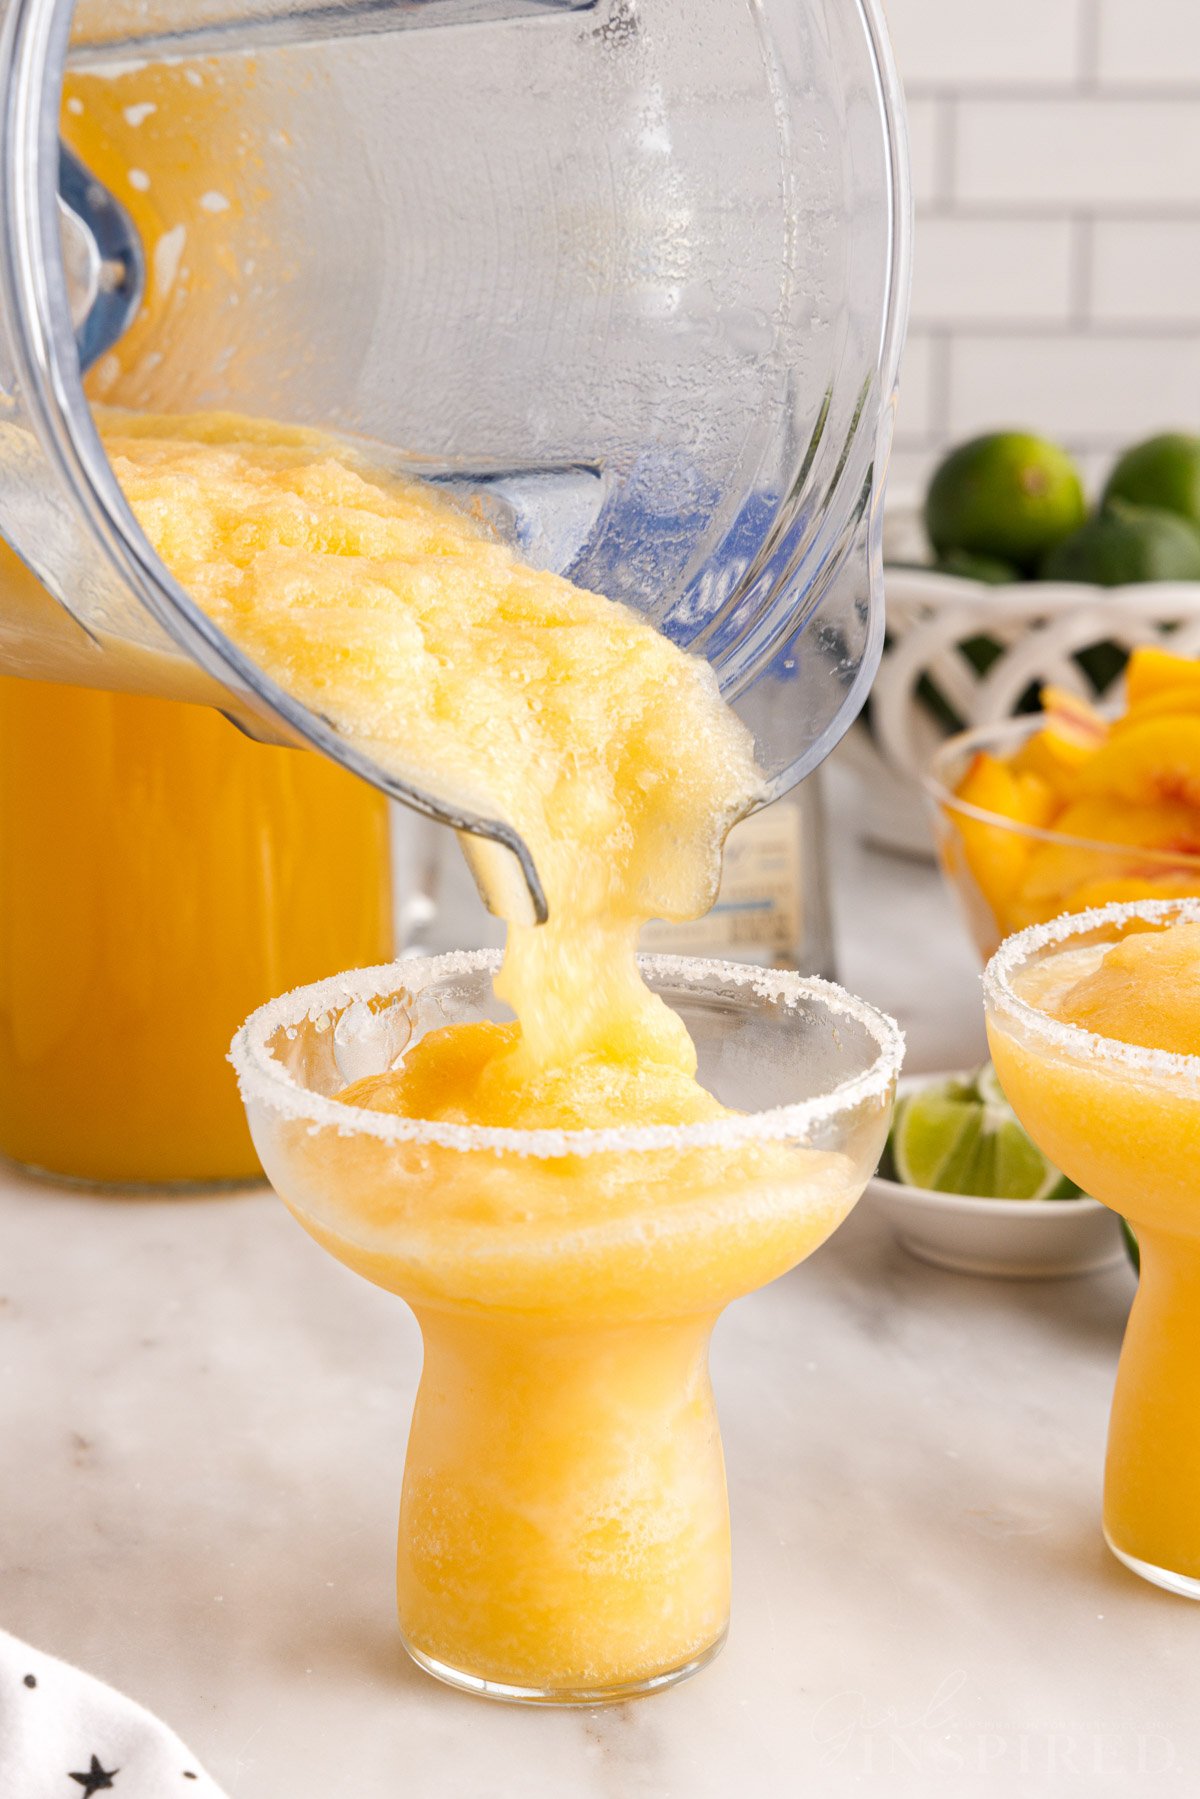 Peach margarita pouring from blender into prepared glass, bowl of limes and bowl of peach slices.